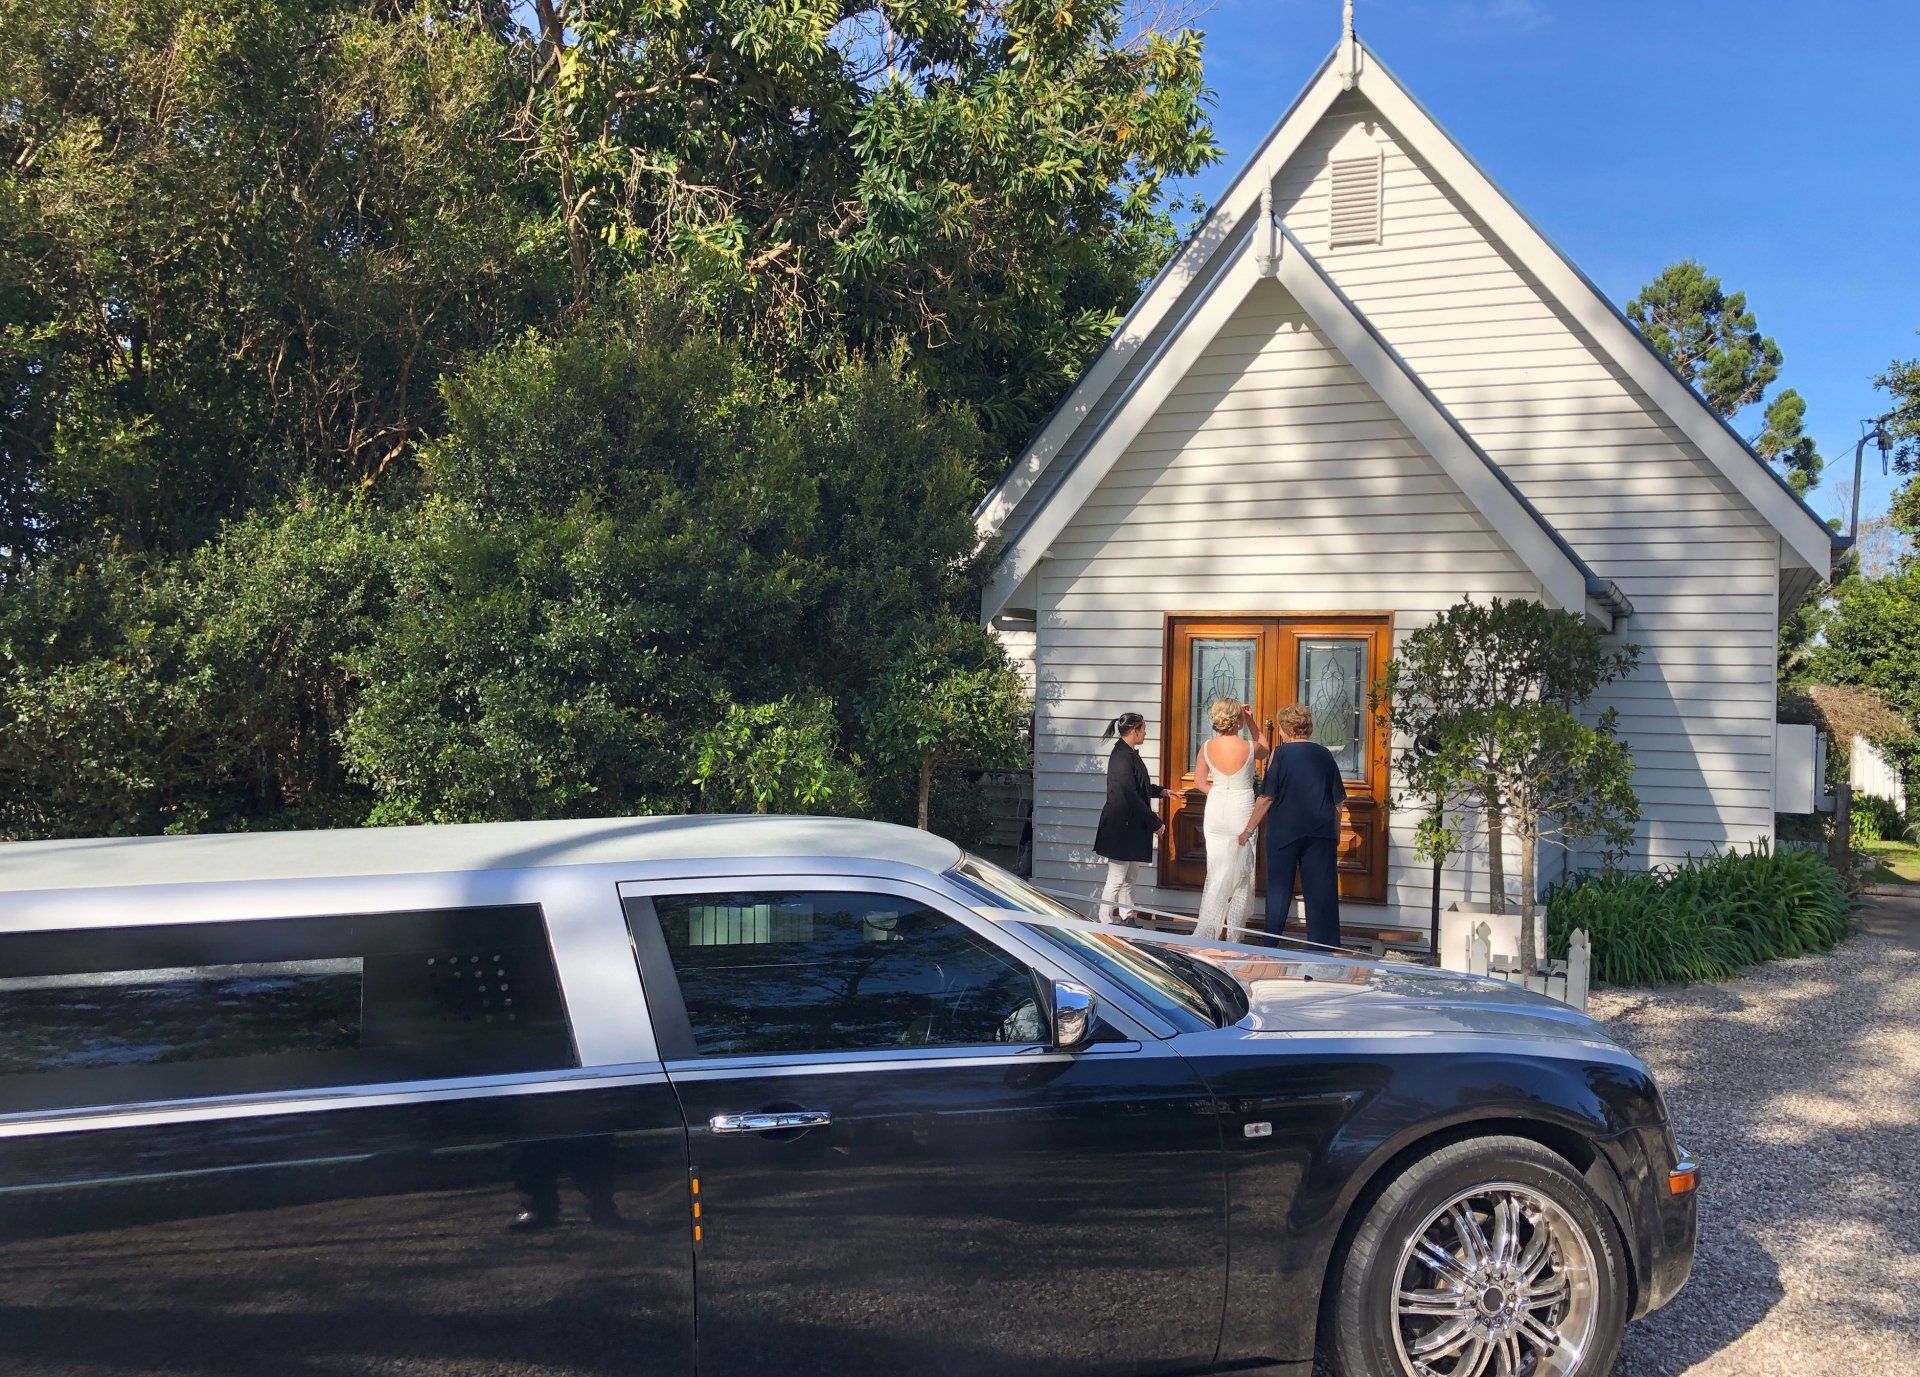 Limousine In The Front Of The Church — Superstretch300 Limousines in Golden Beach, QLD